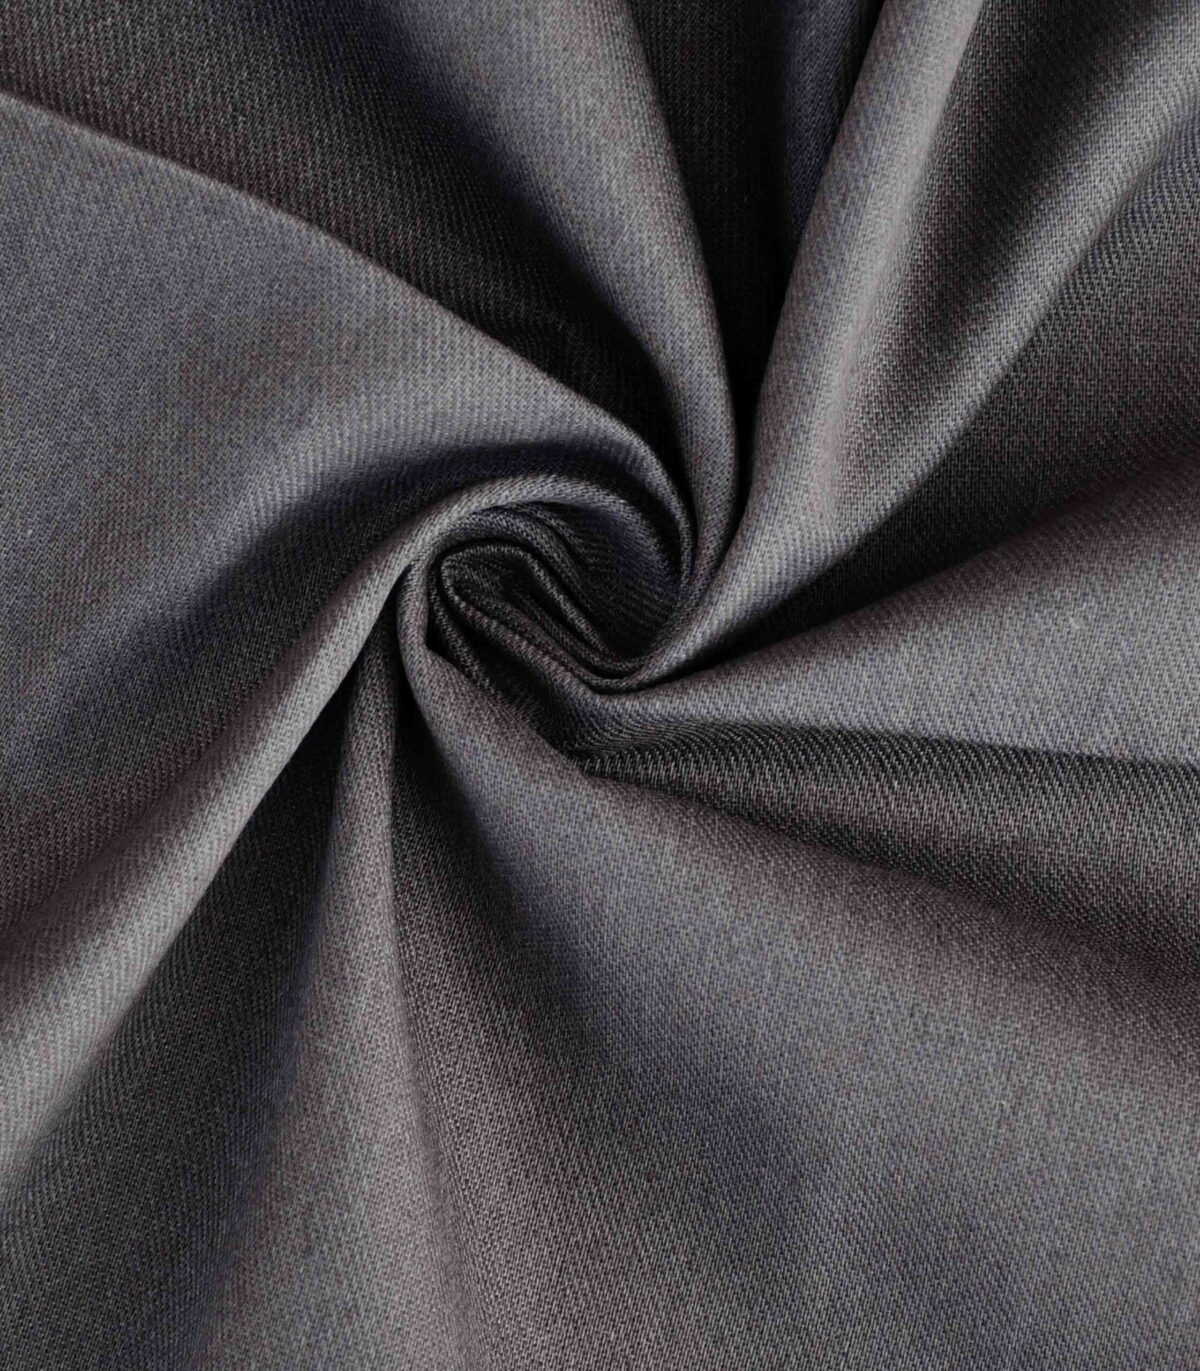 Cotton Blend Grey Color Twill Fabric